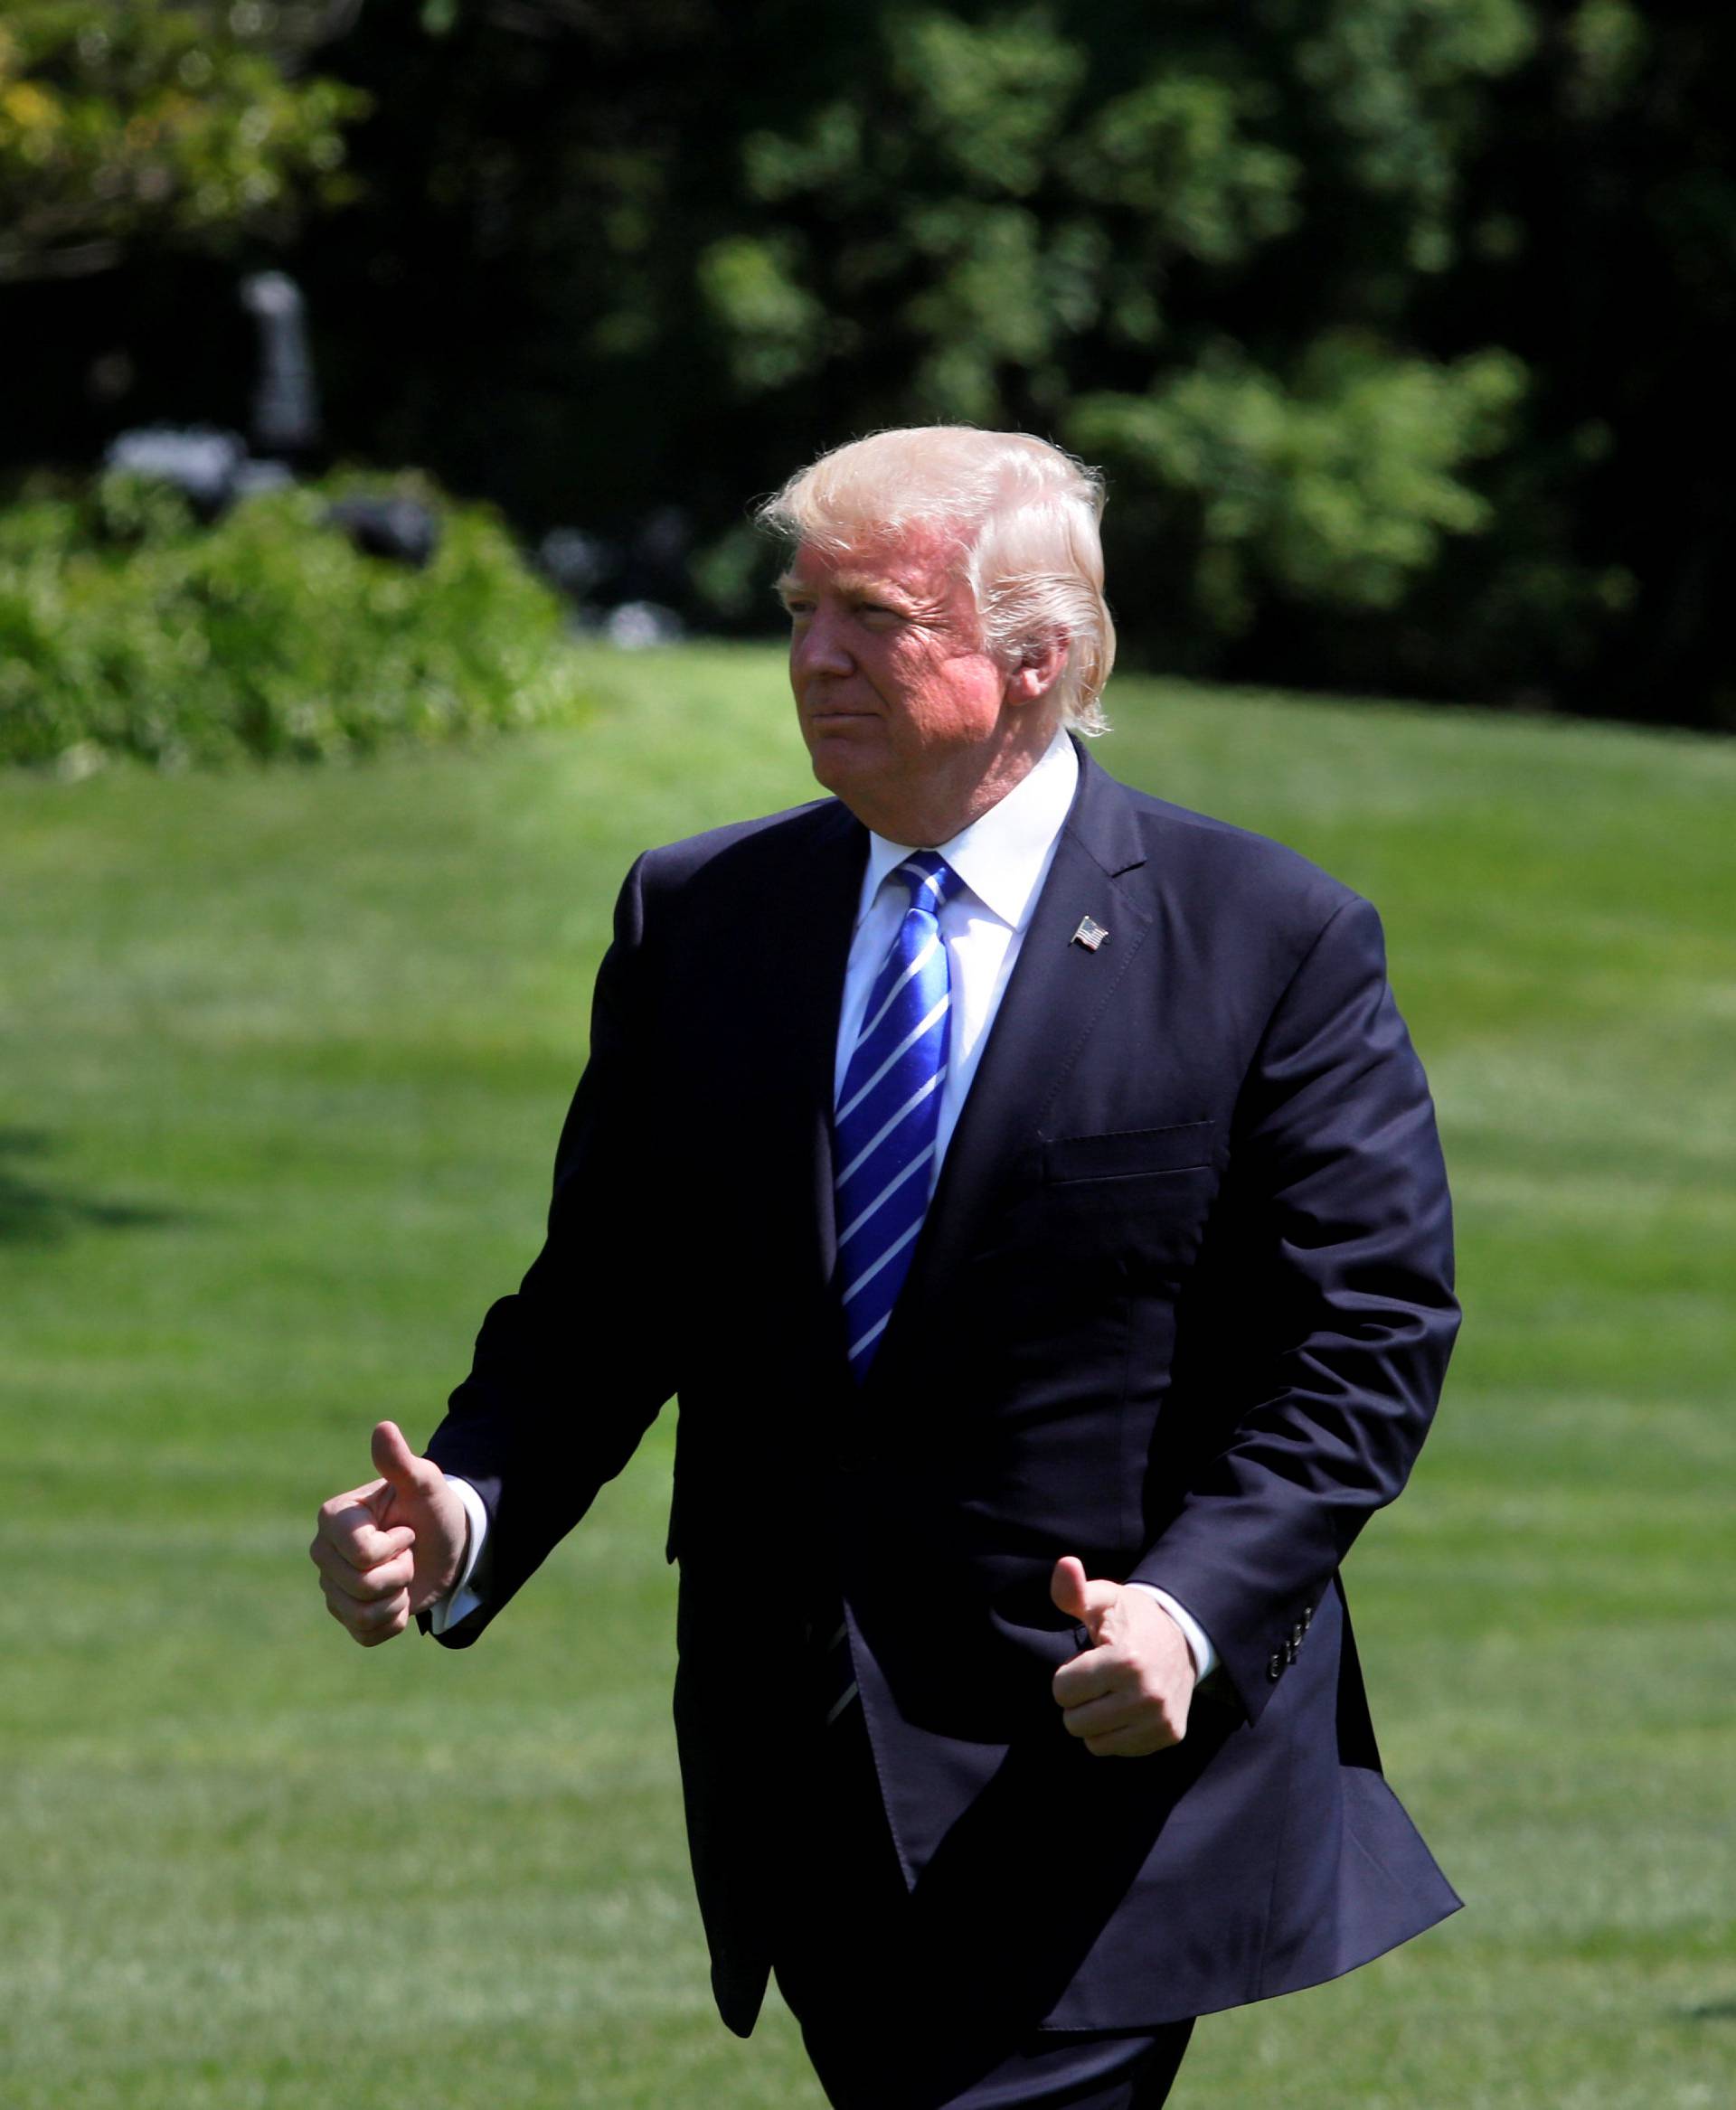 President Donald Trump gestures as he walks on the South Lawn